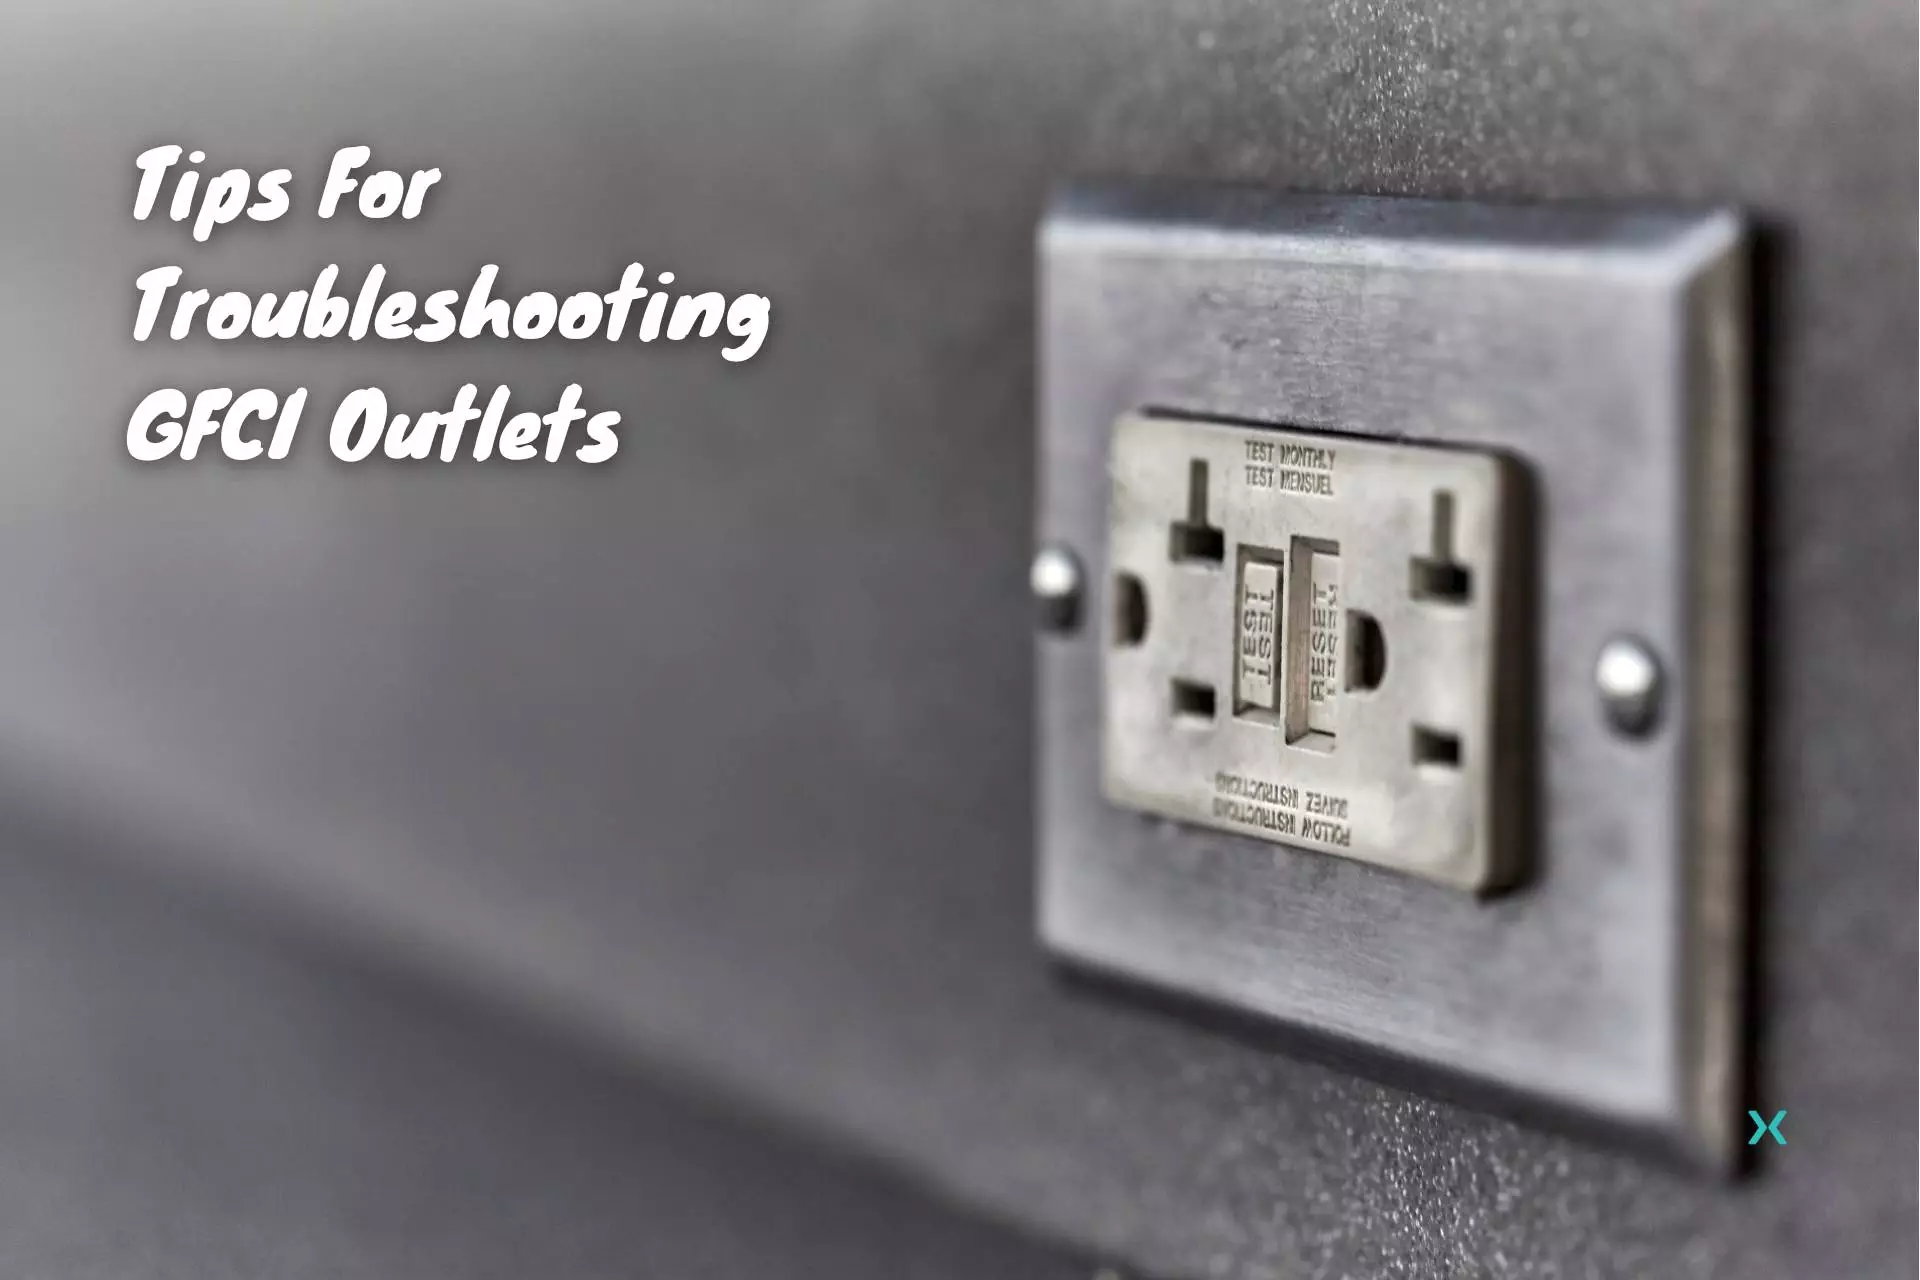 Tips For Troubleshooting GFCI Outlets